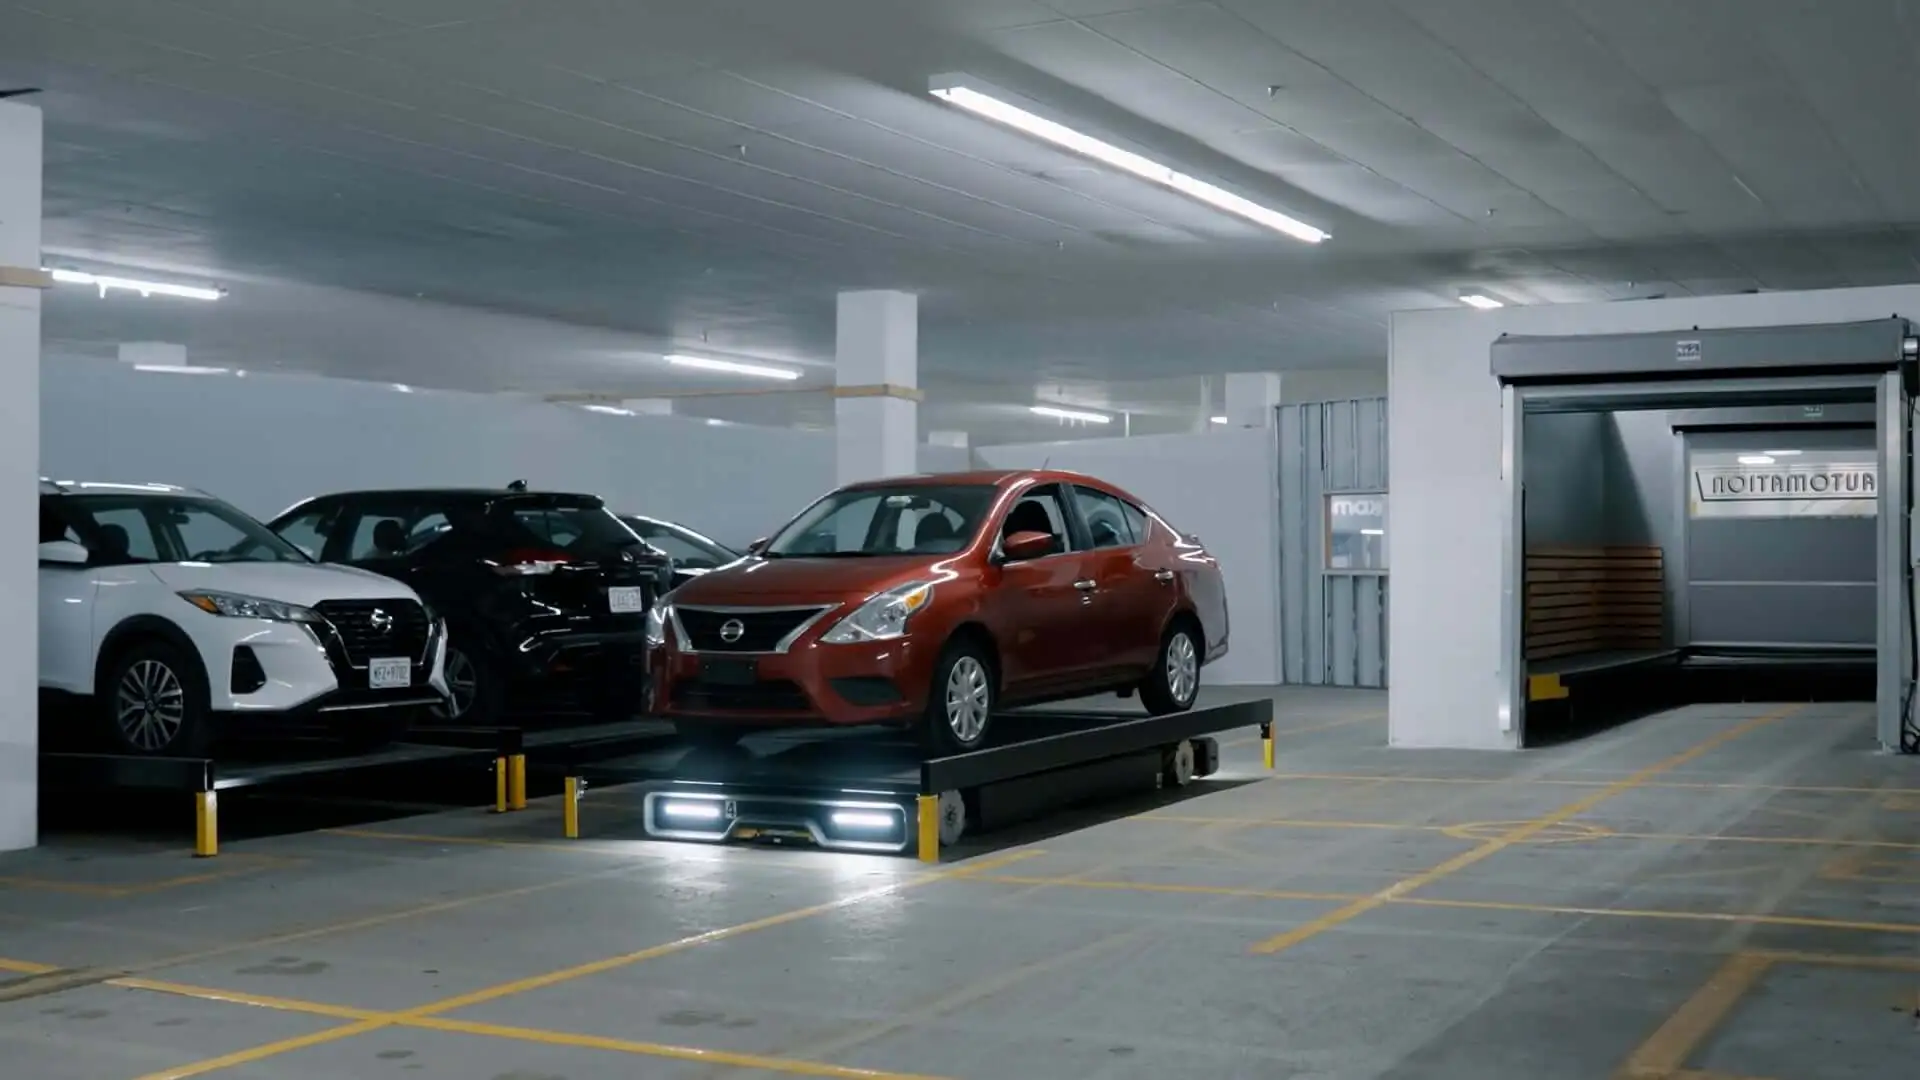 A bright underground parking garage with several cars parked. A red sedan is highlighted on an illuminated platform, being taken to its parking spot by a mobile robot.